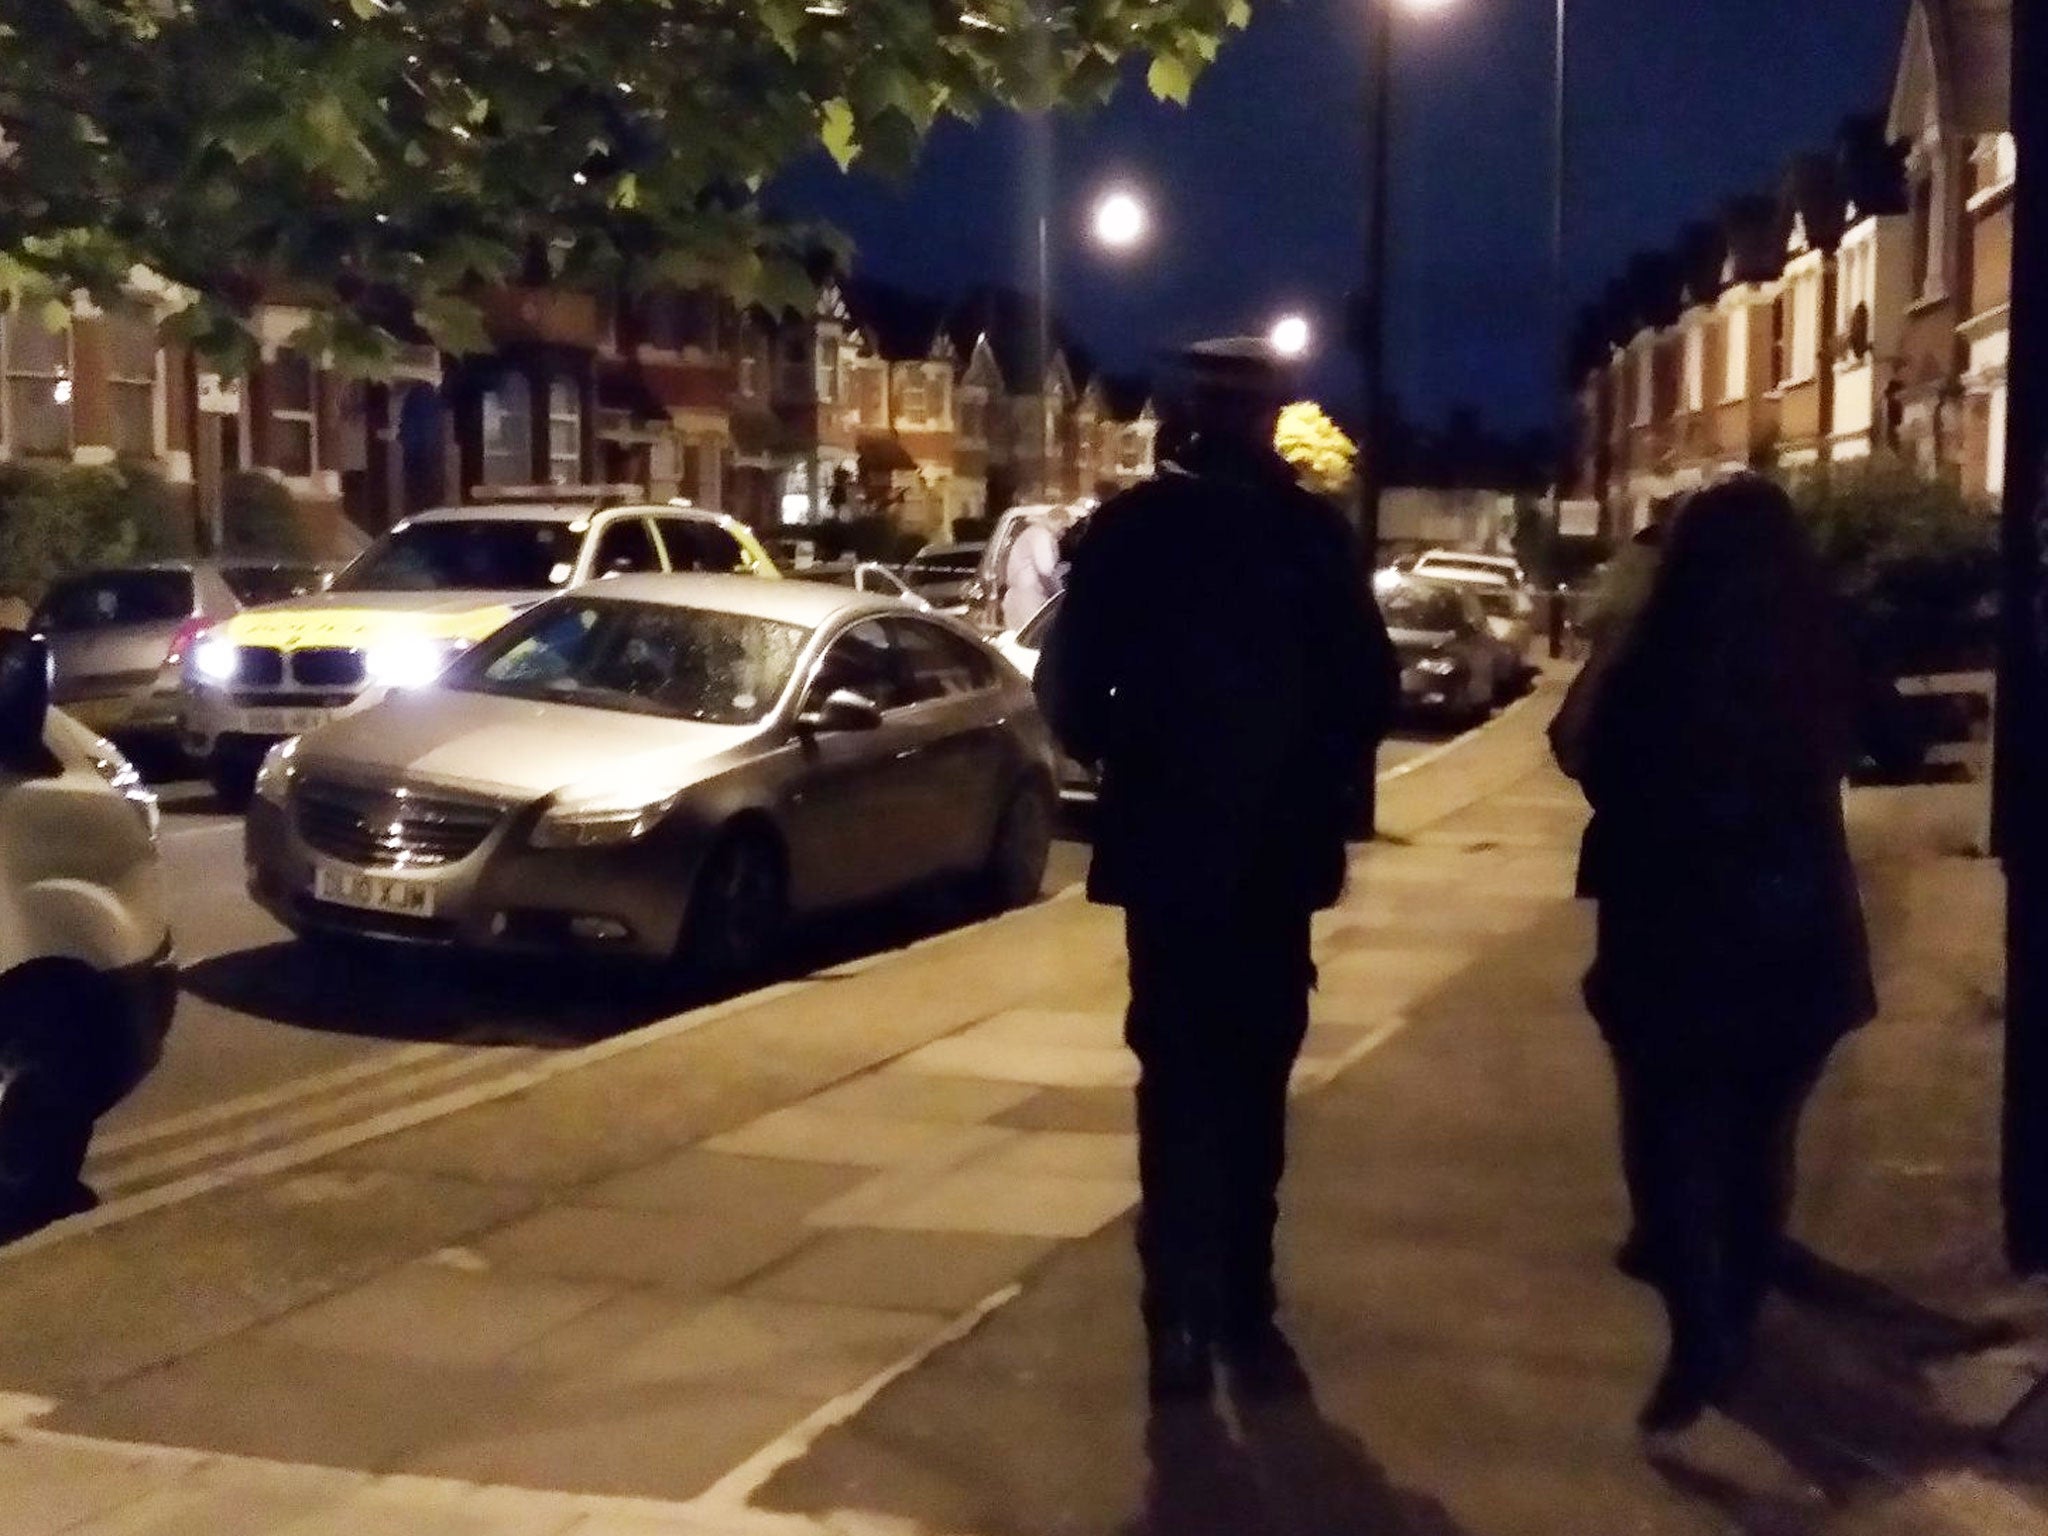 Police shot the woman during the raid in north London last week